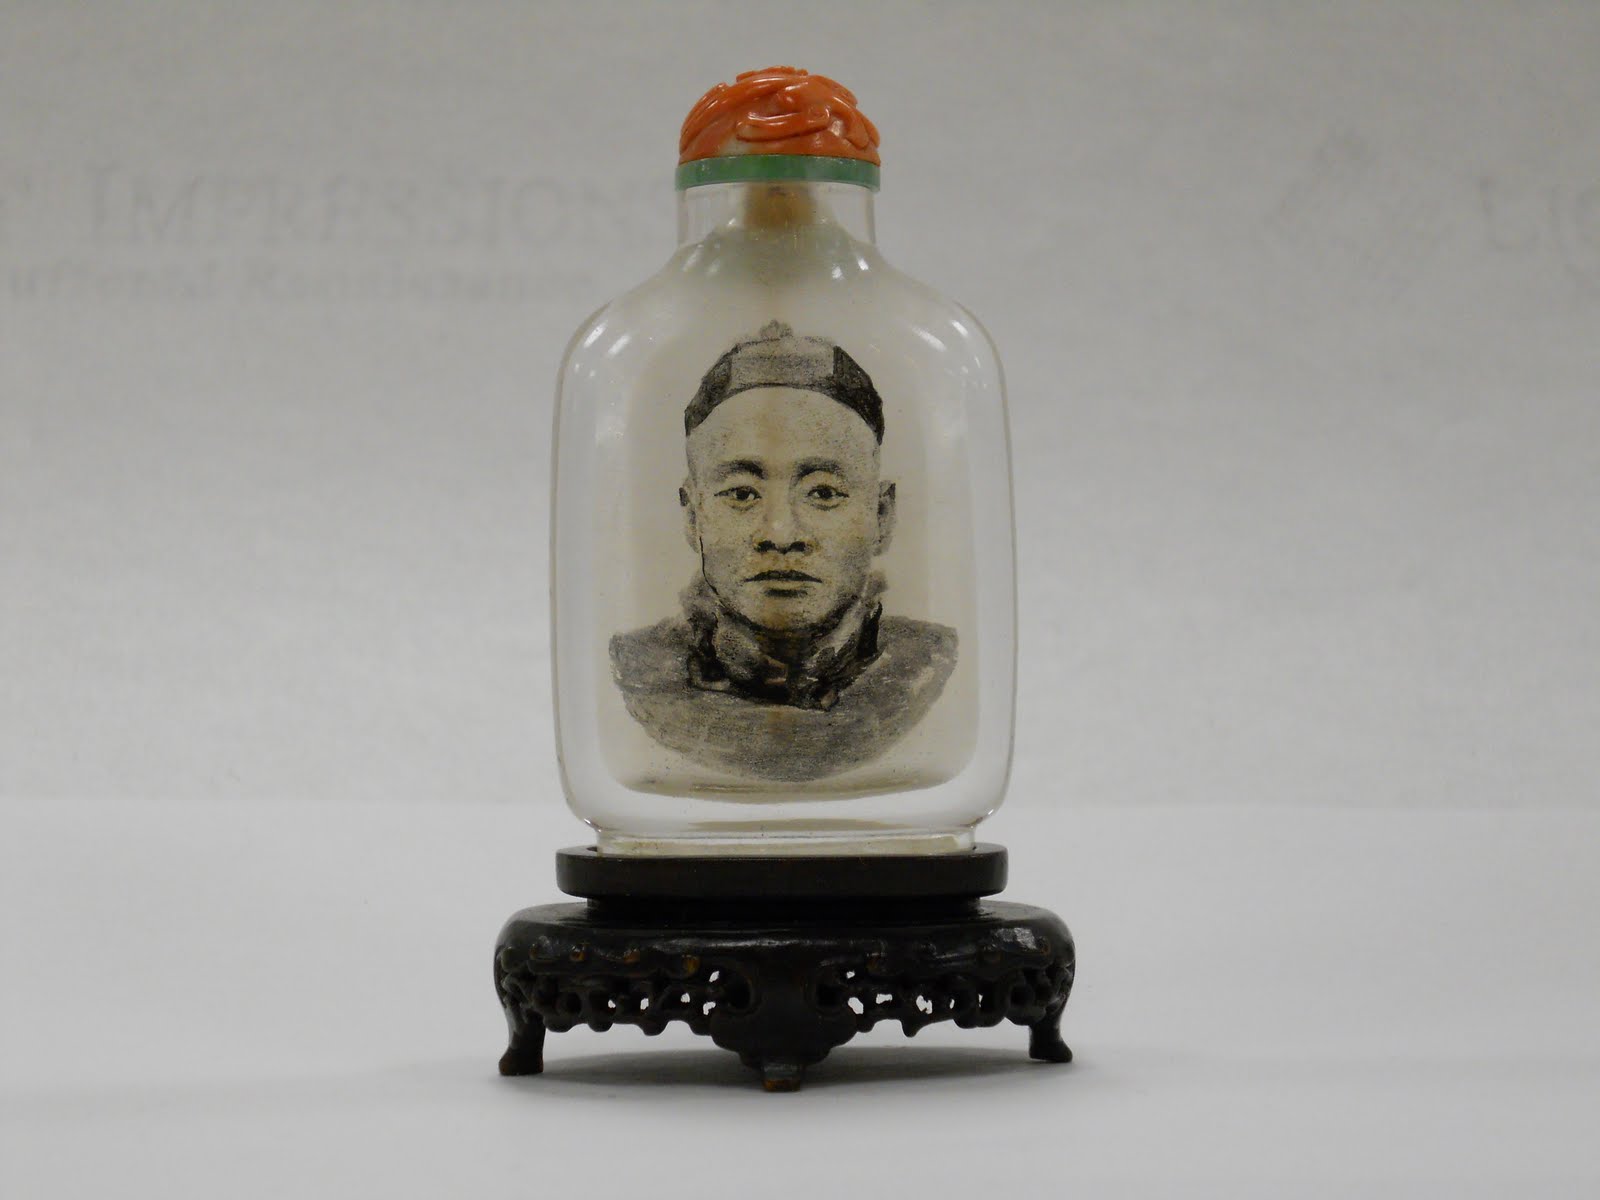 Snuff bottle with portrait of man in round hat